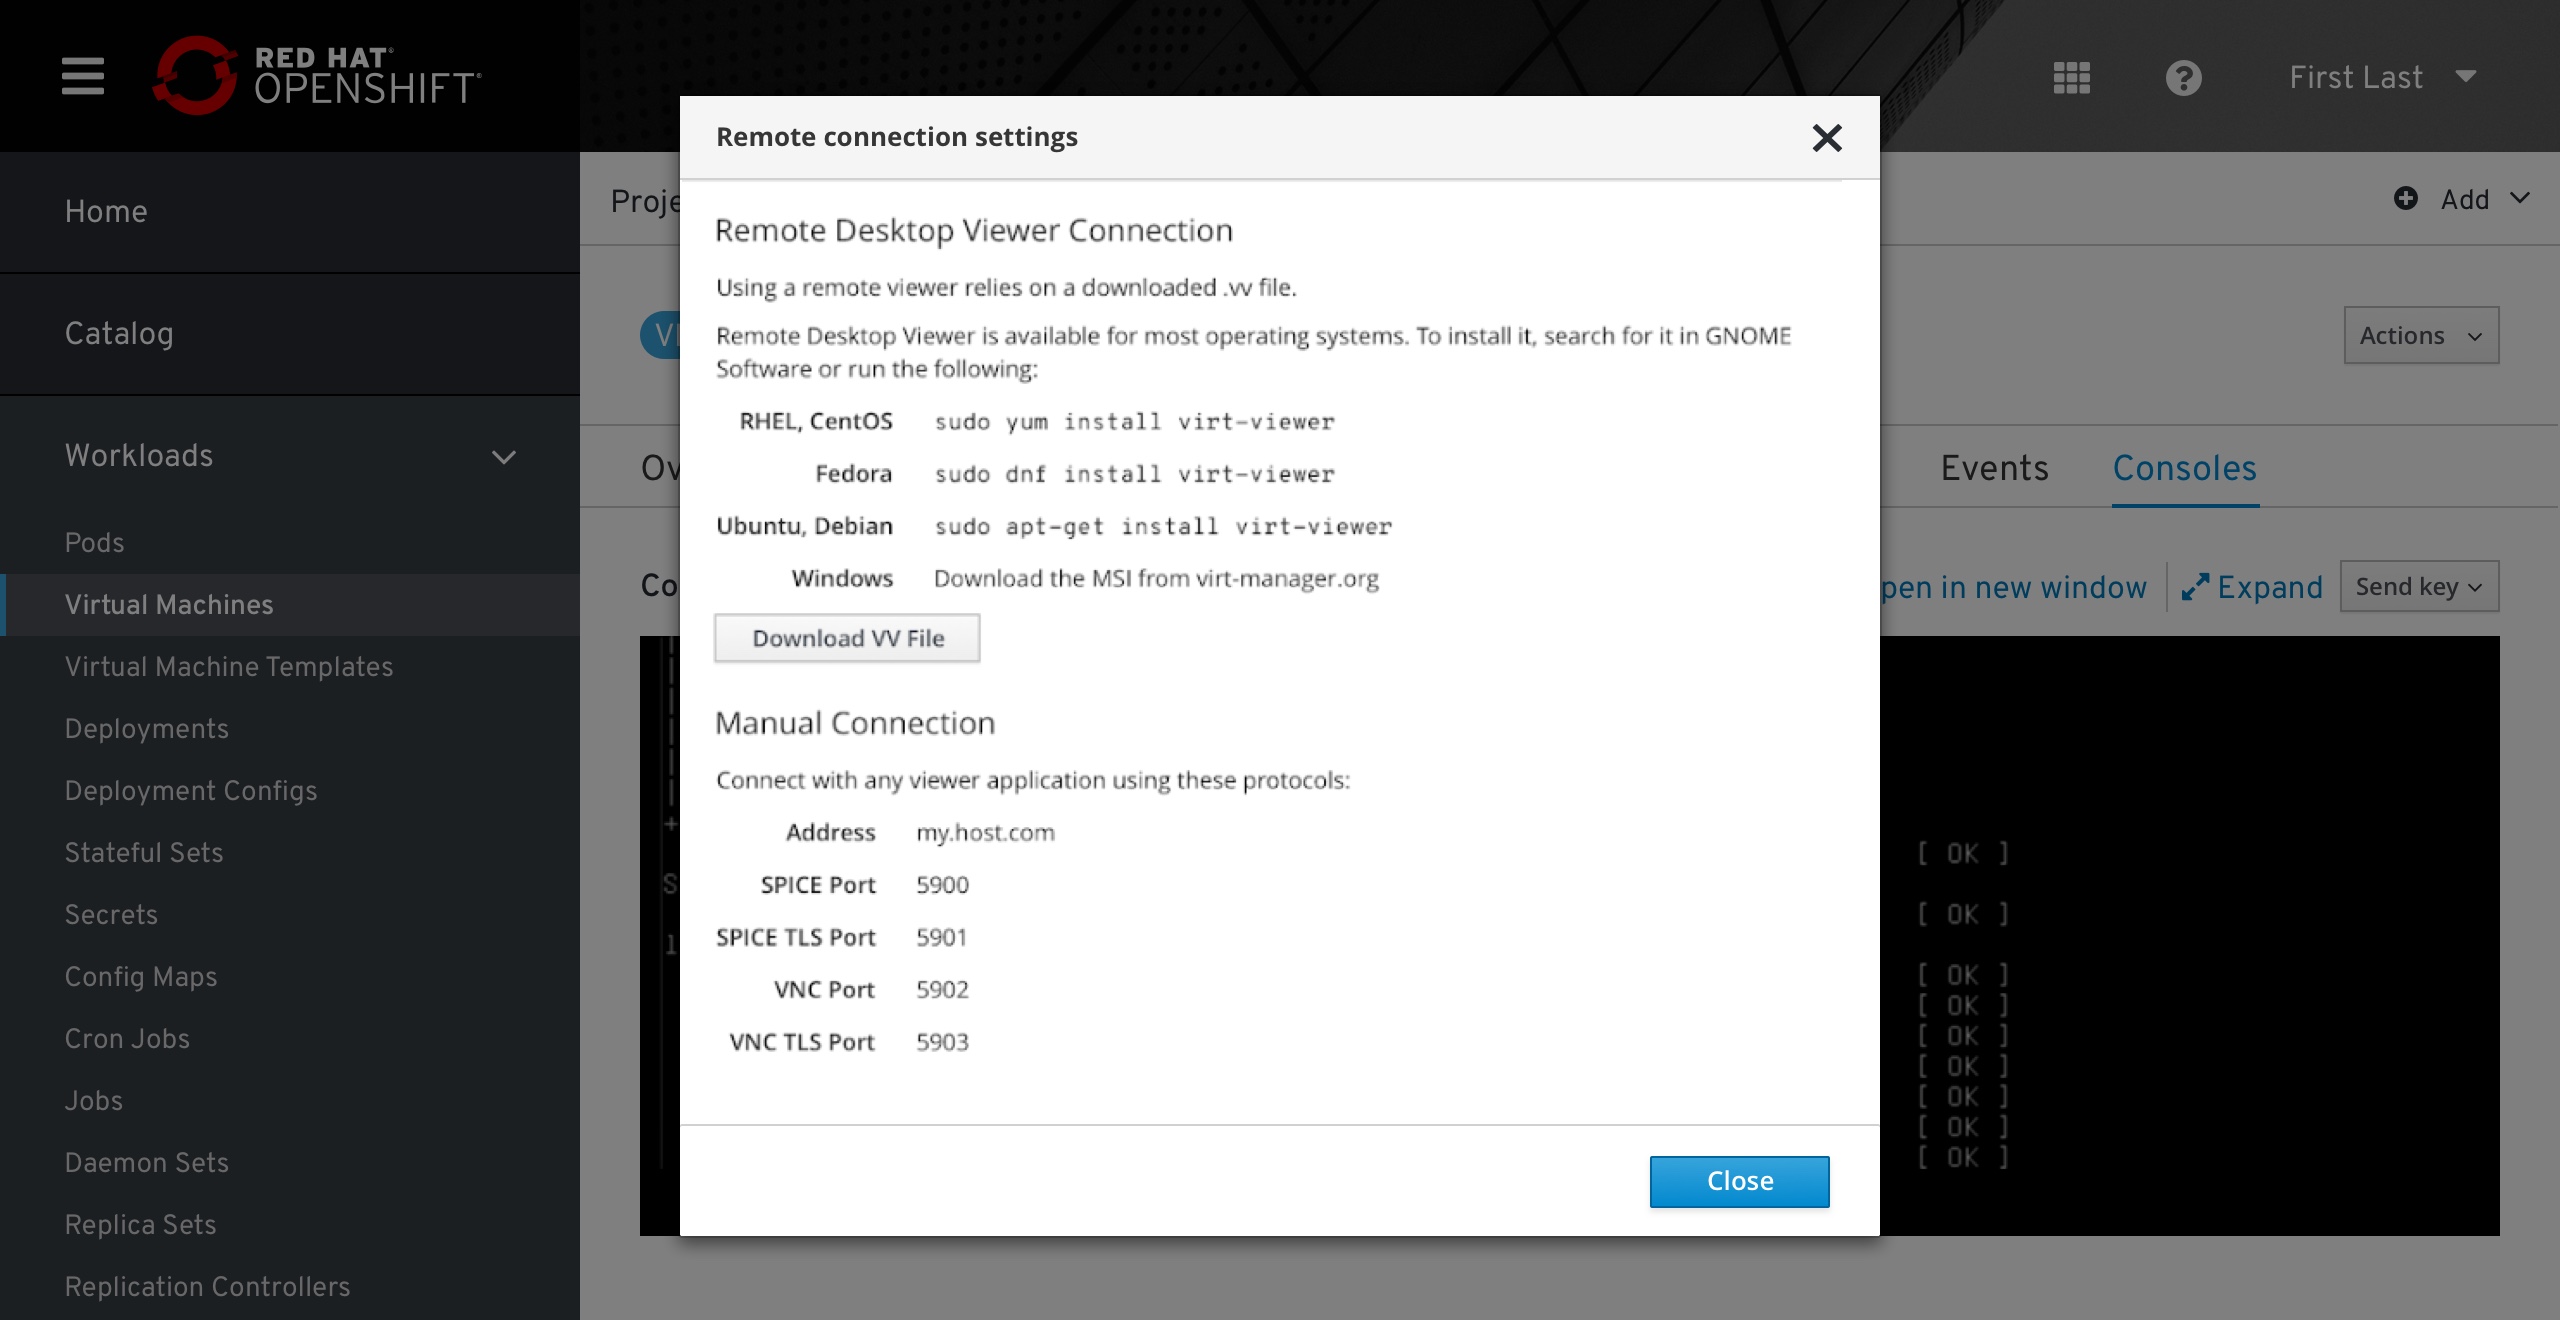 VM - Remote conection settings modal